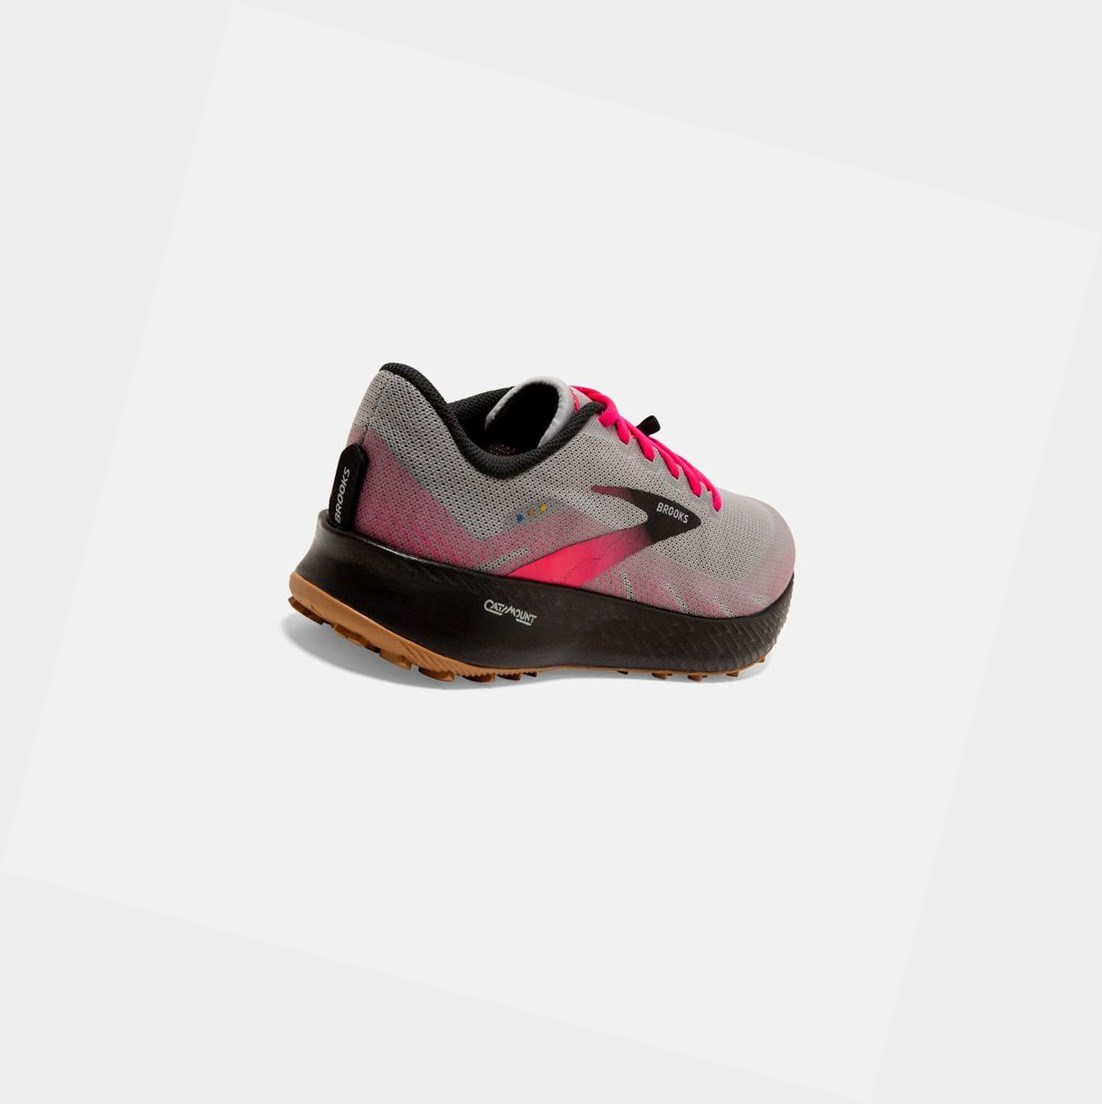 Brooks Catamount Women's Trail Shoes Alloy / Pink / Black | CUIP-56219